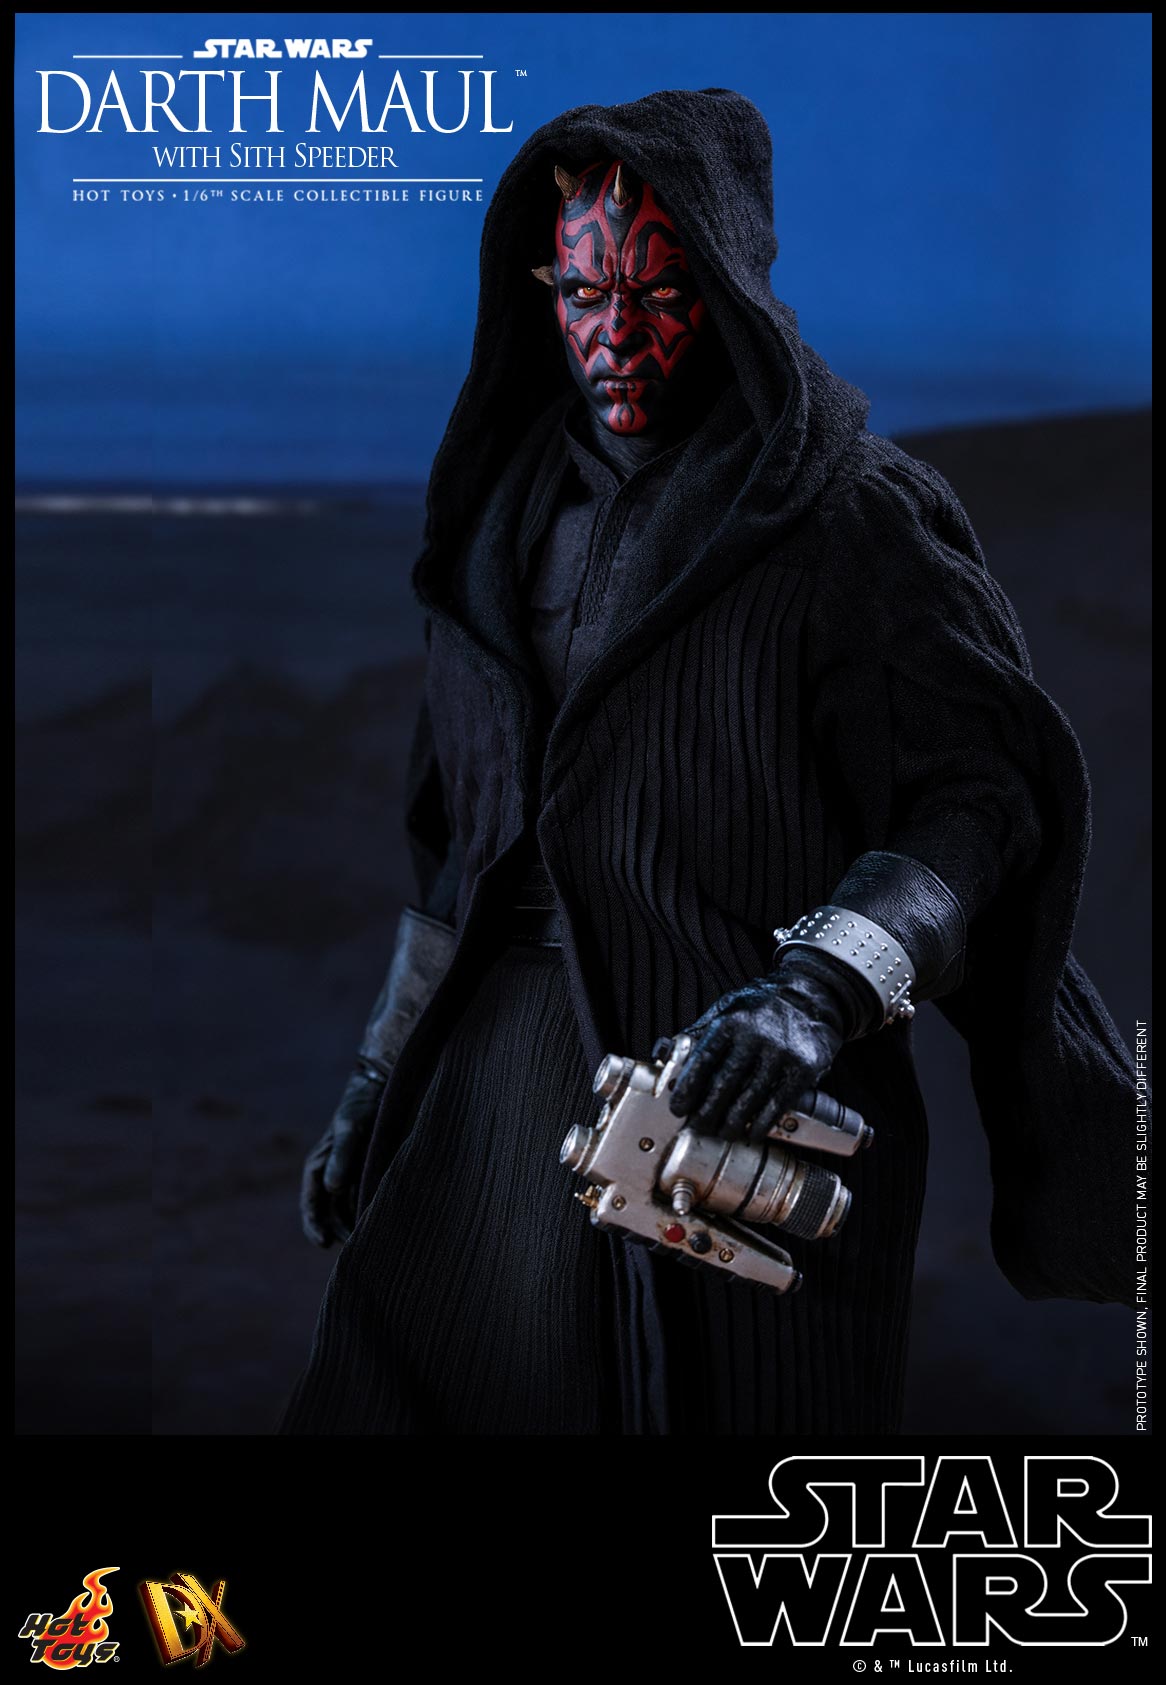 Hot-Toys---Star-Wars---Darth-Maul-with-Sith-Speeder-collectible-figure_PR27